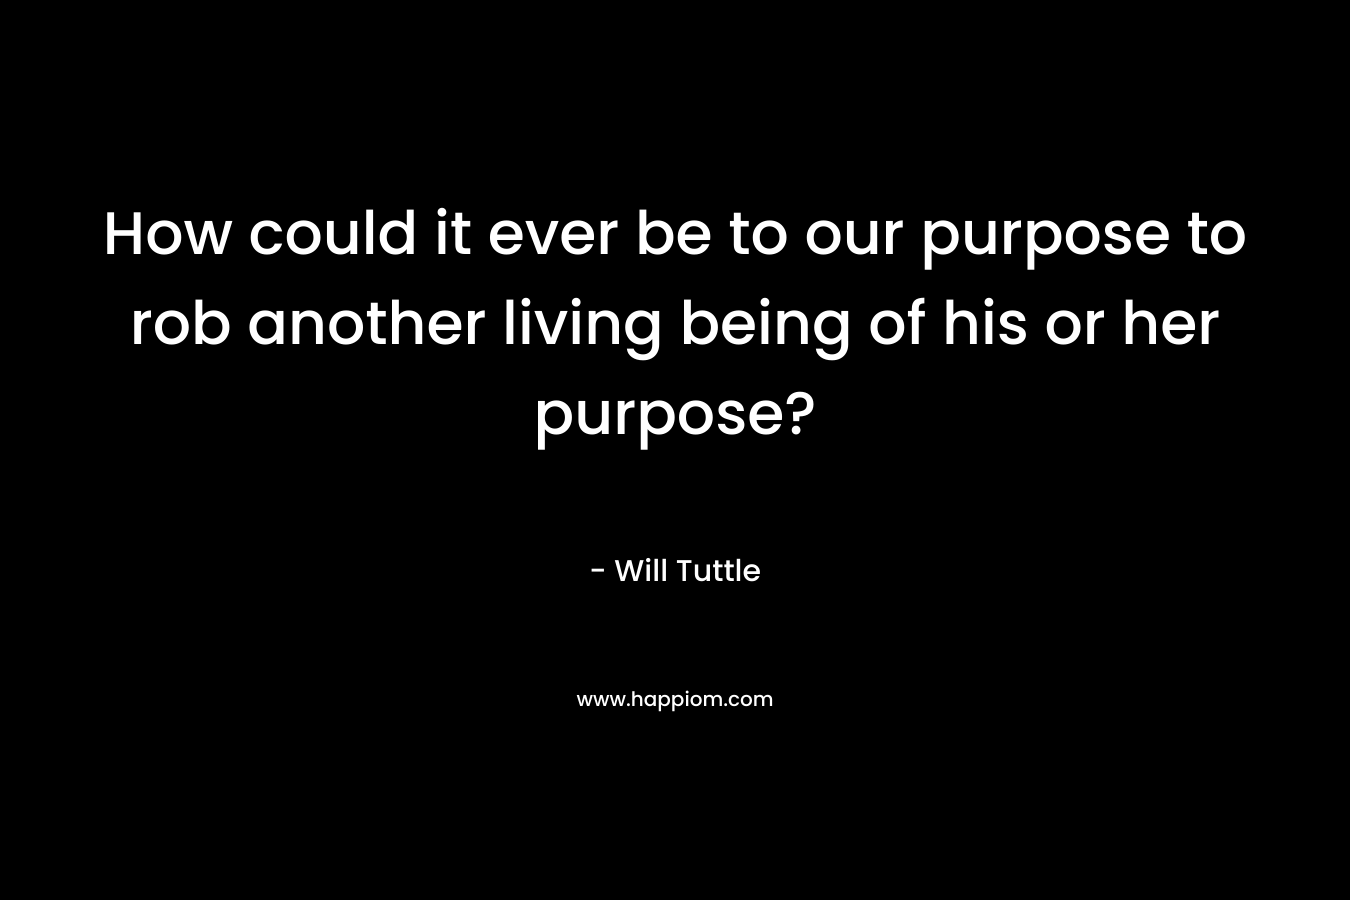 How could it ever be to our purpose to rob another living being of his or her purpose?